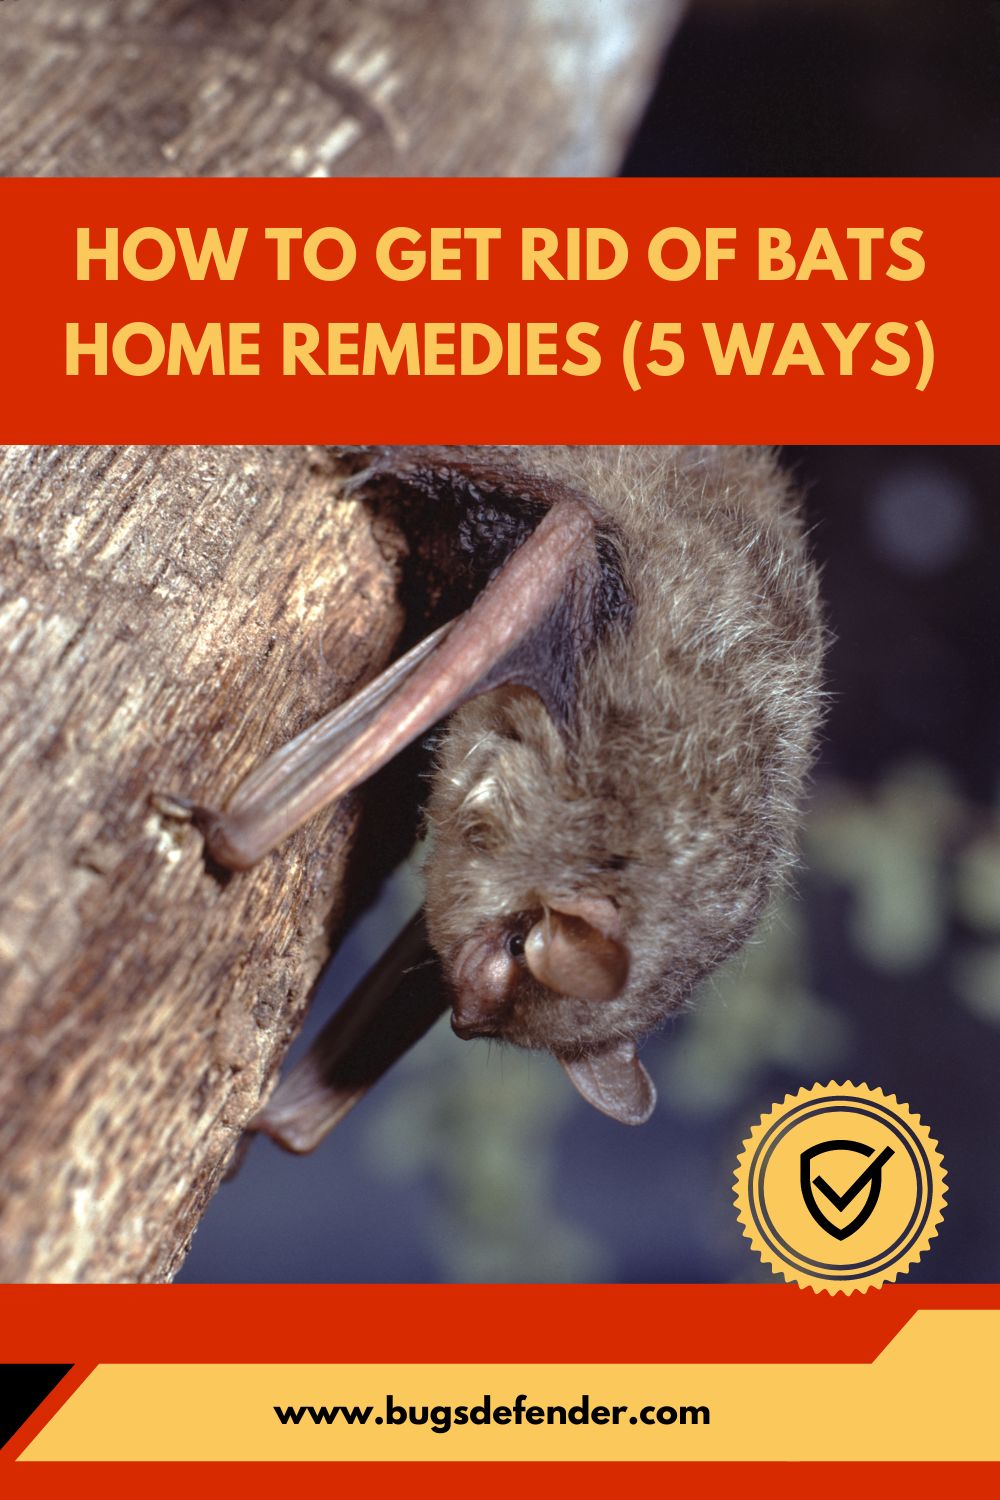 How To Get Rid Of Bats Home Remedies (5 Ways) pin1